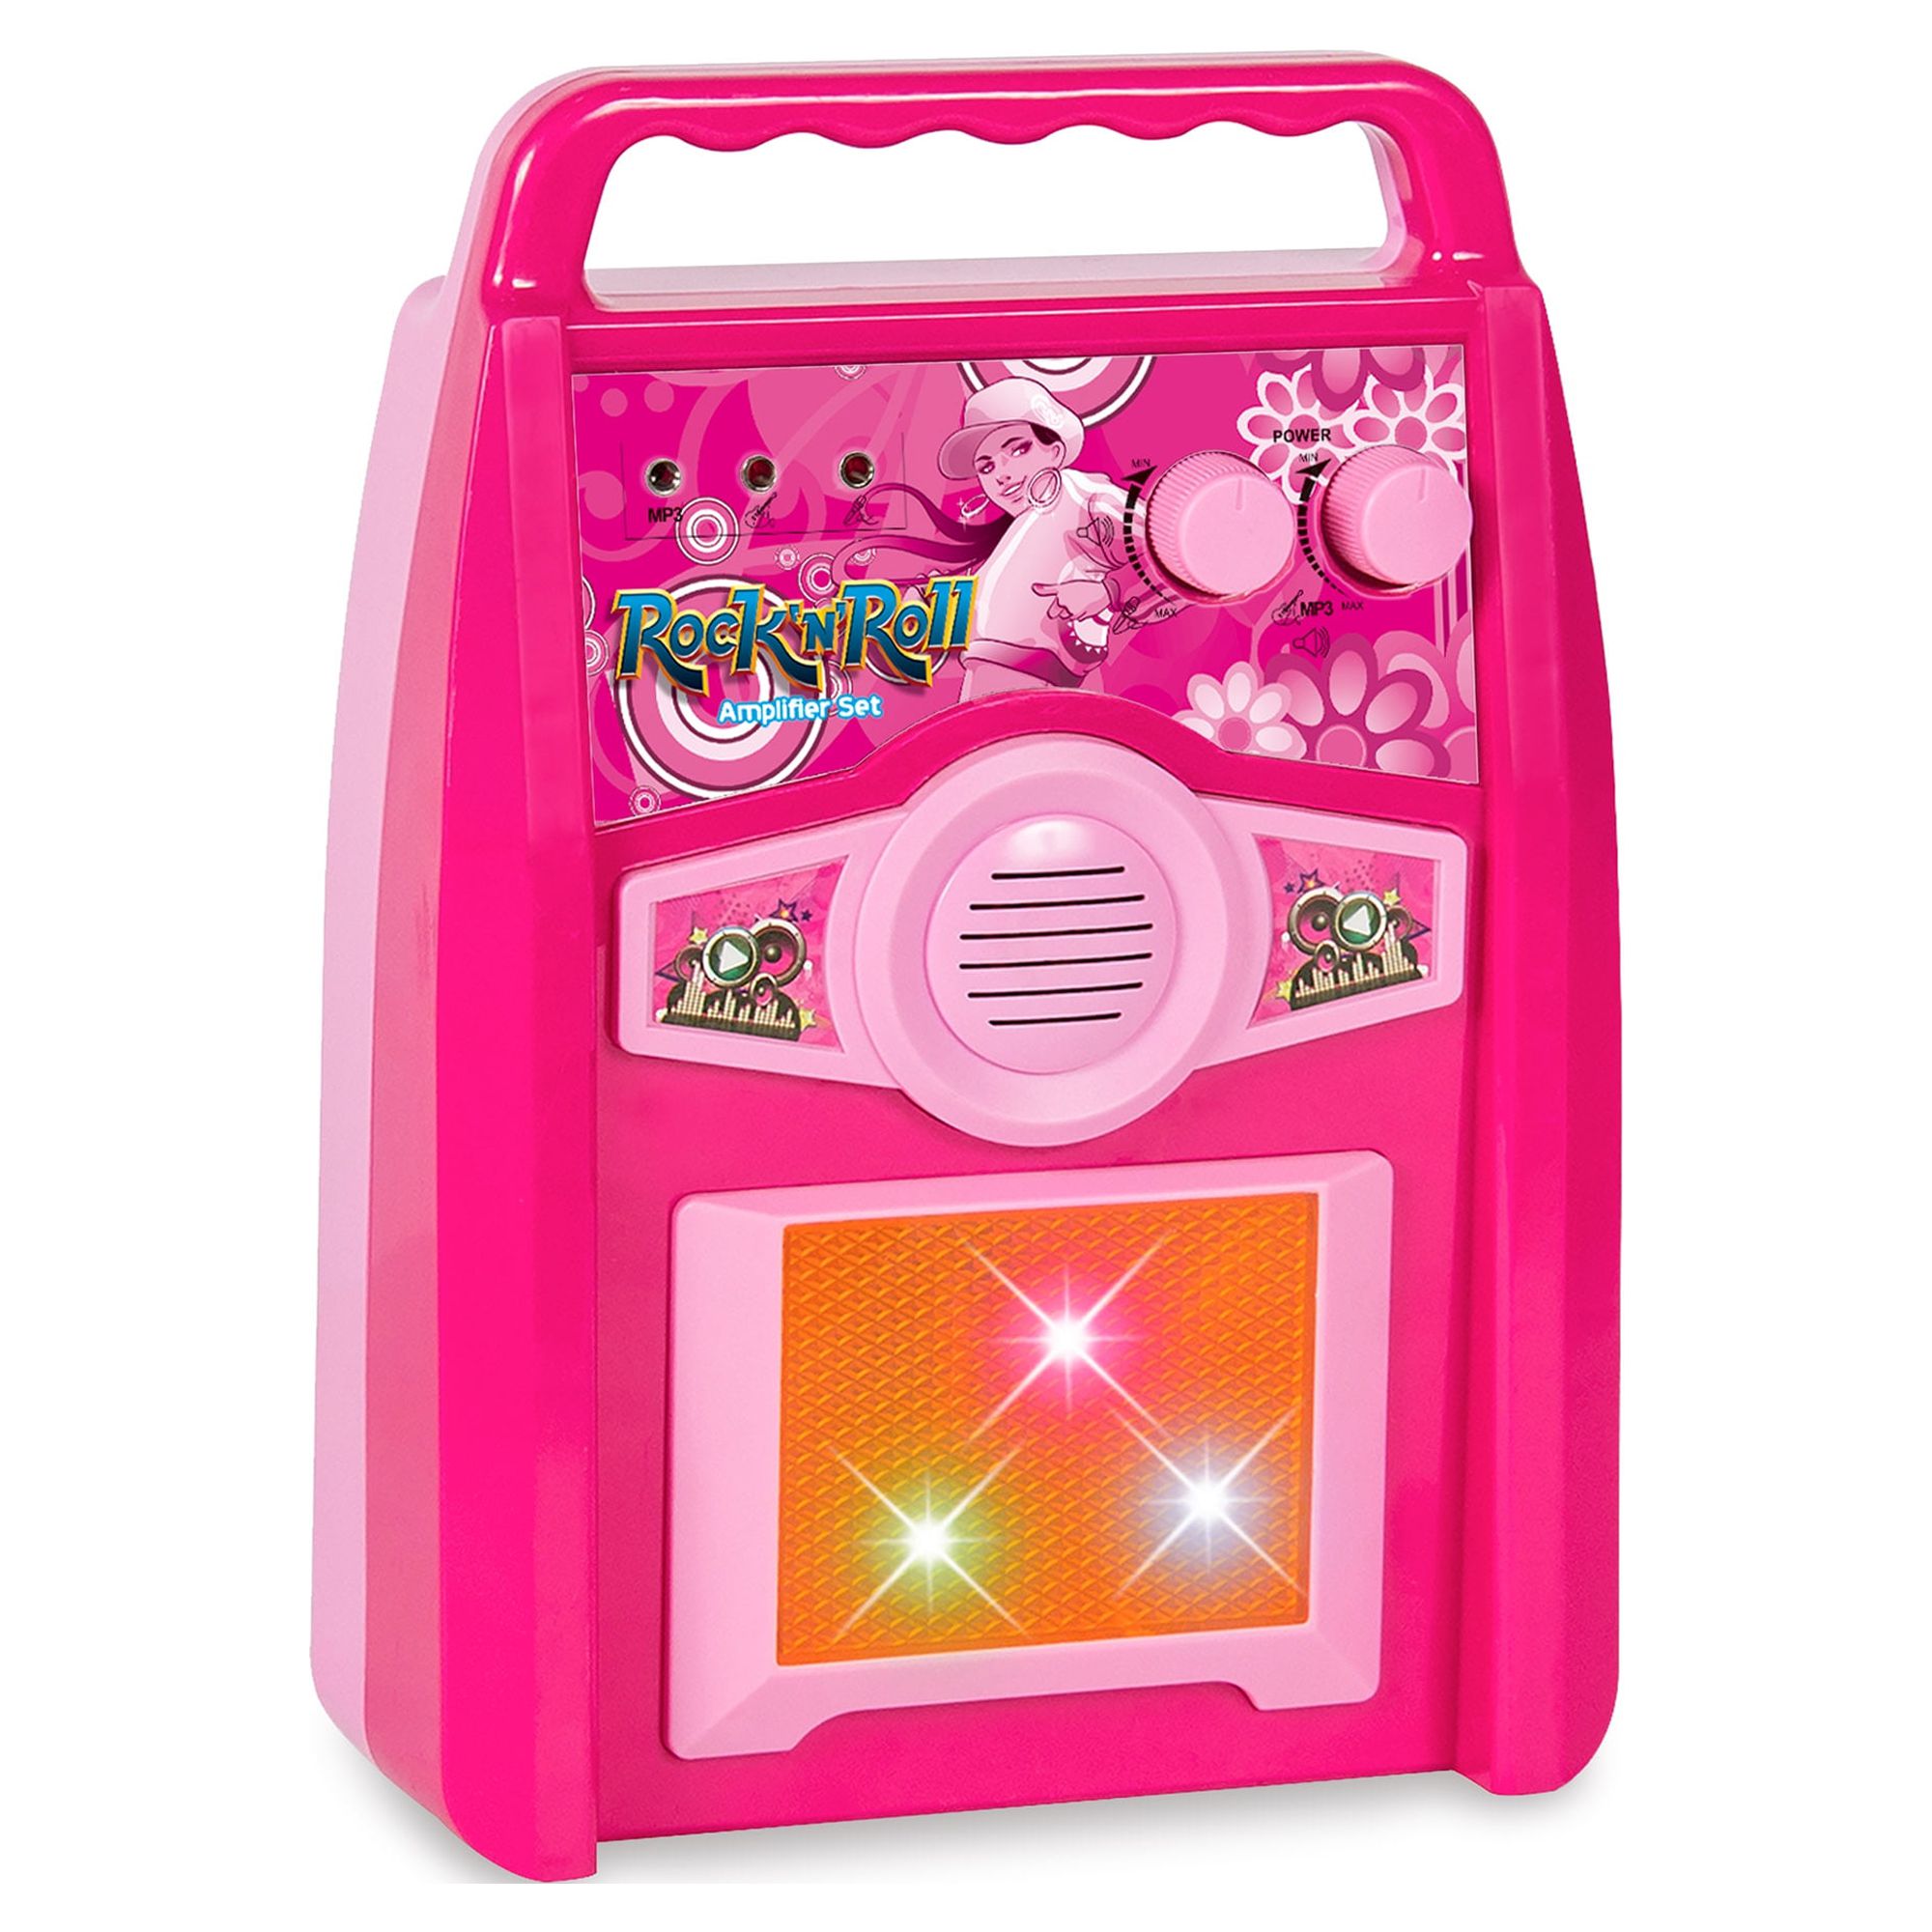 Best Choice Products Kids Electric Musical Guitar Toy Play Set w/ 6 Demo Songs, Whammy Bar, Microphone, Amp, AUX - Pink - image 6 of 7